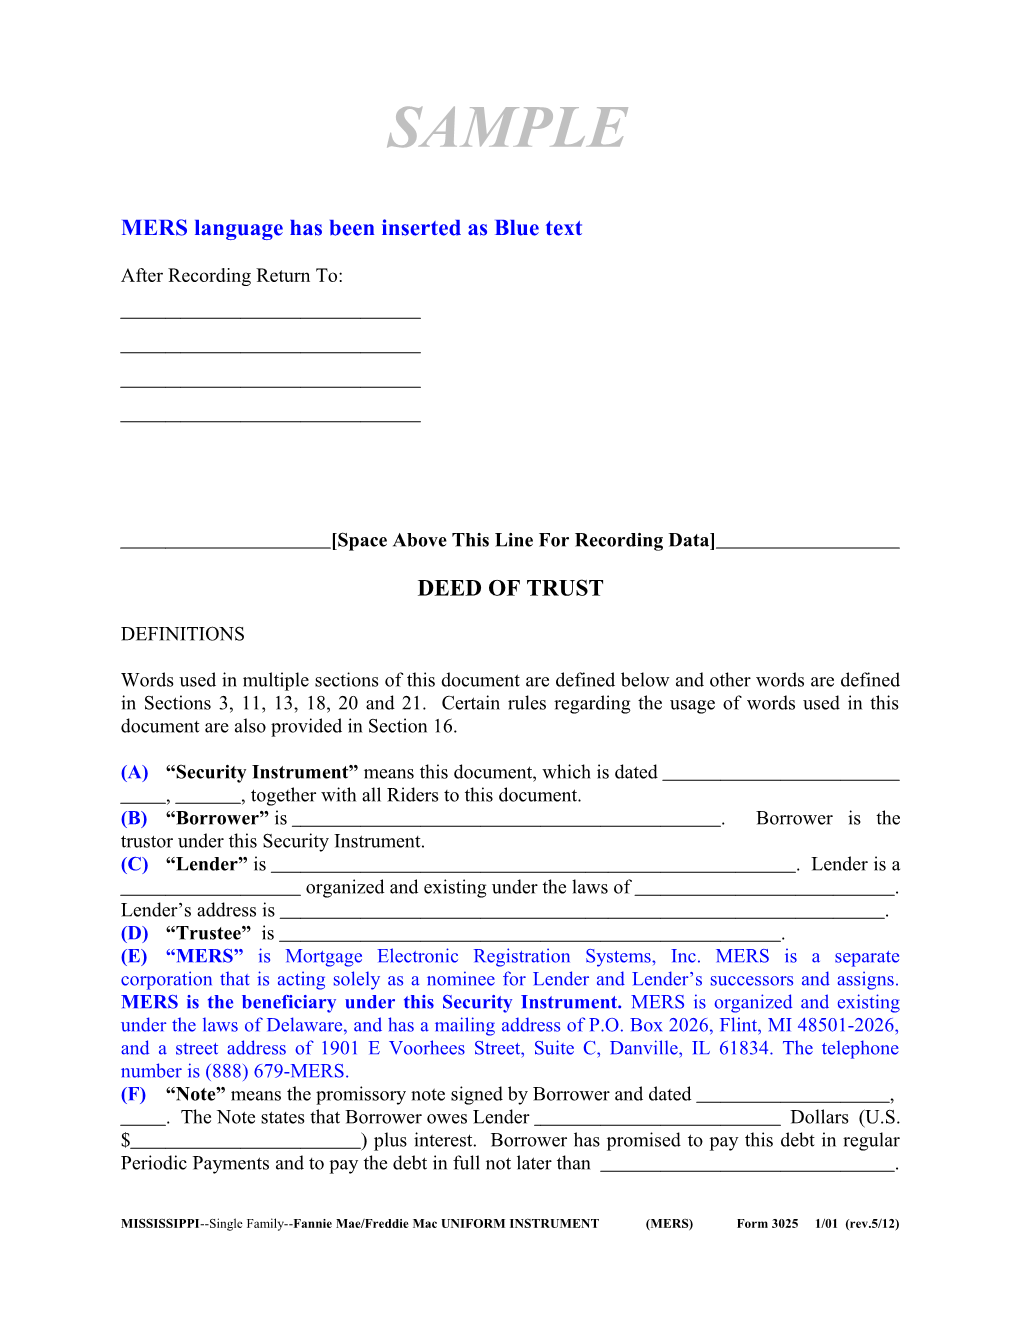 Mississippi Deed of Trust (MERS)